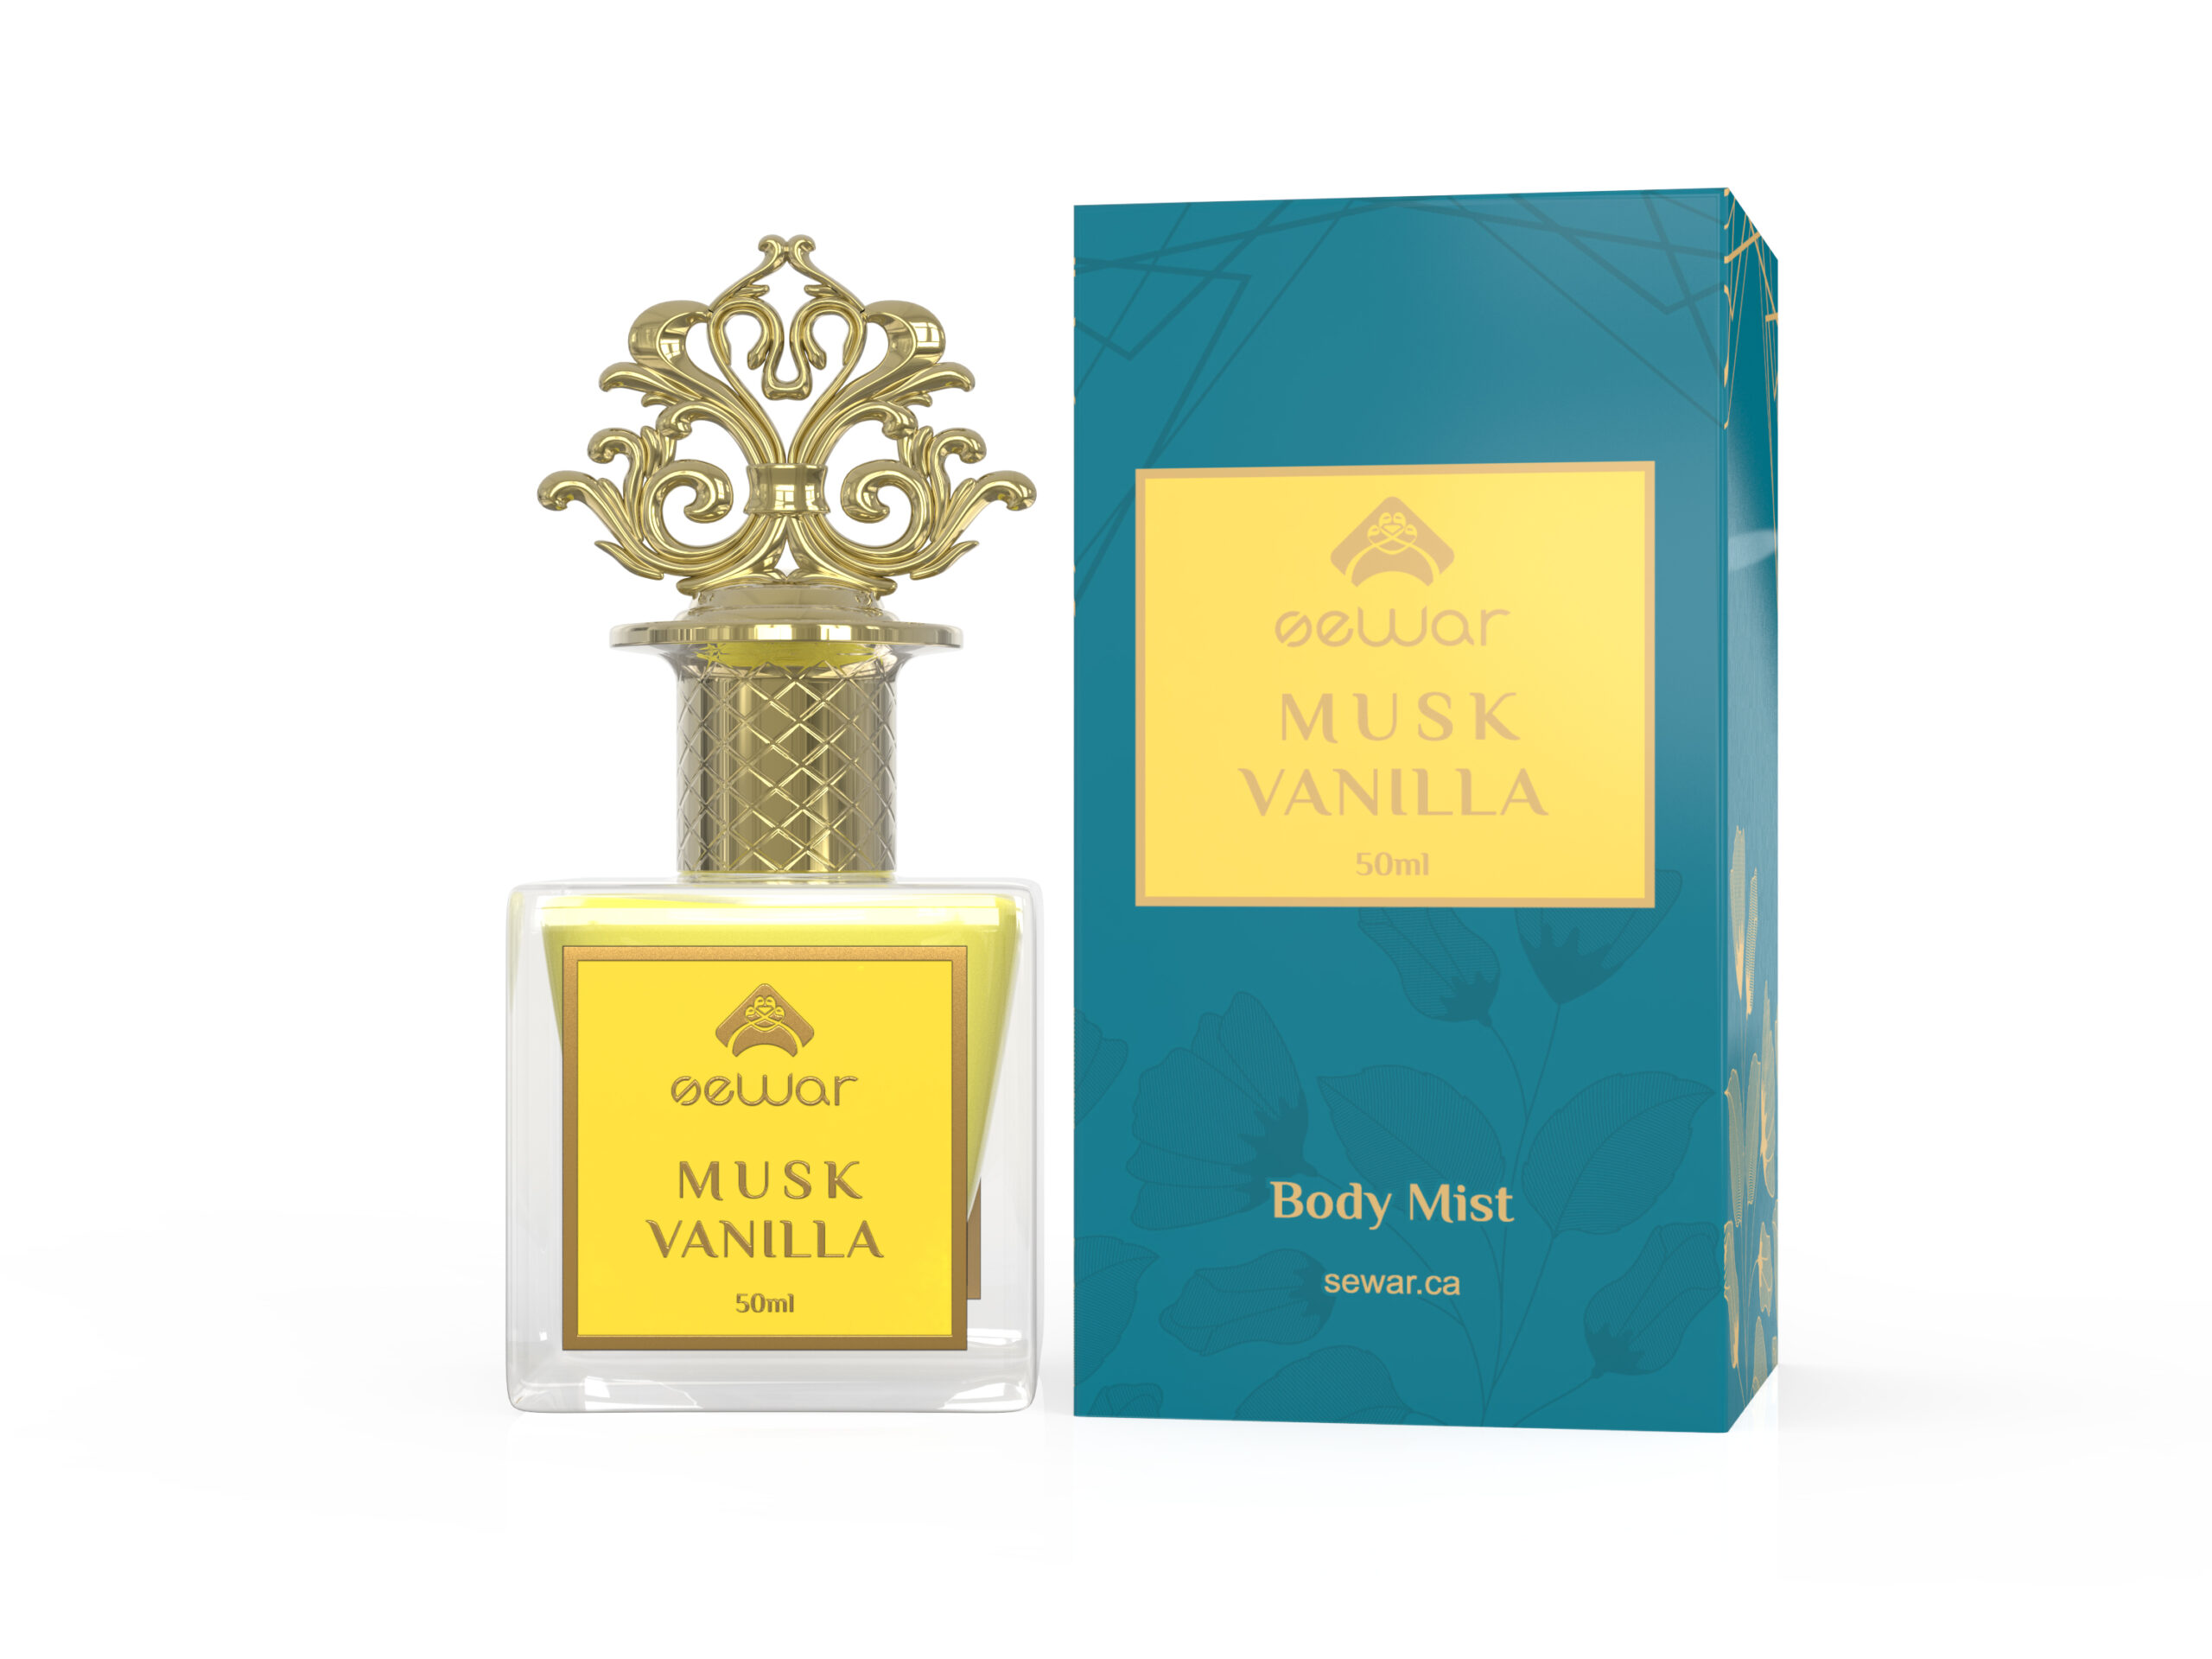 Vanilla Musk Body Mist by Sewar with Warm Vanilla and Soft Musk Notes